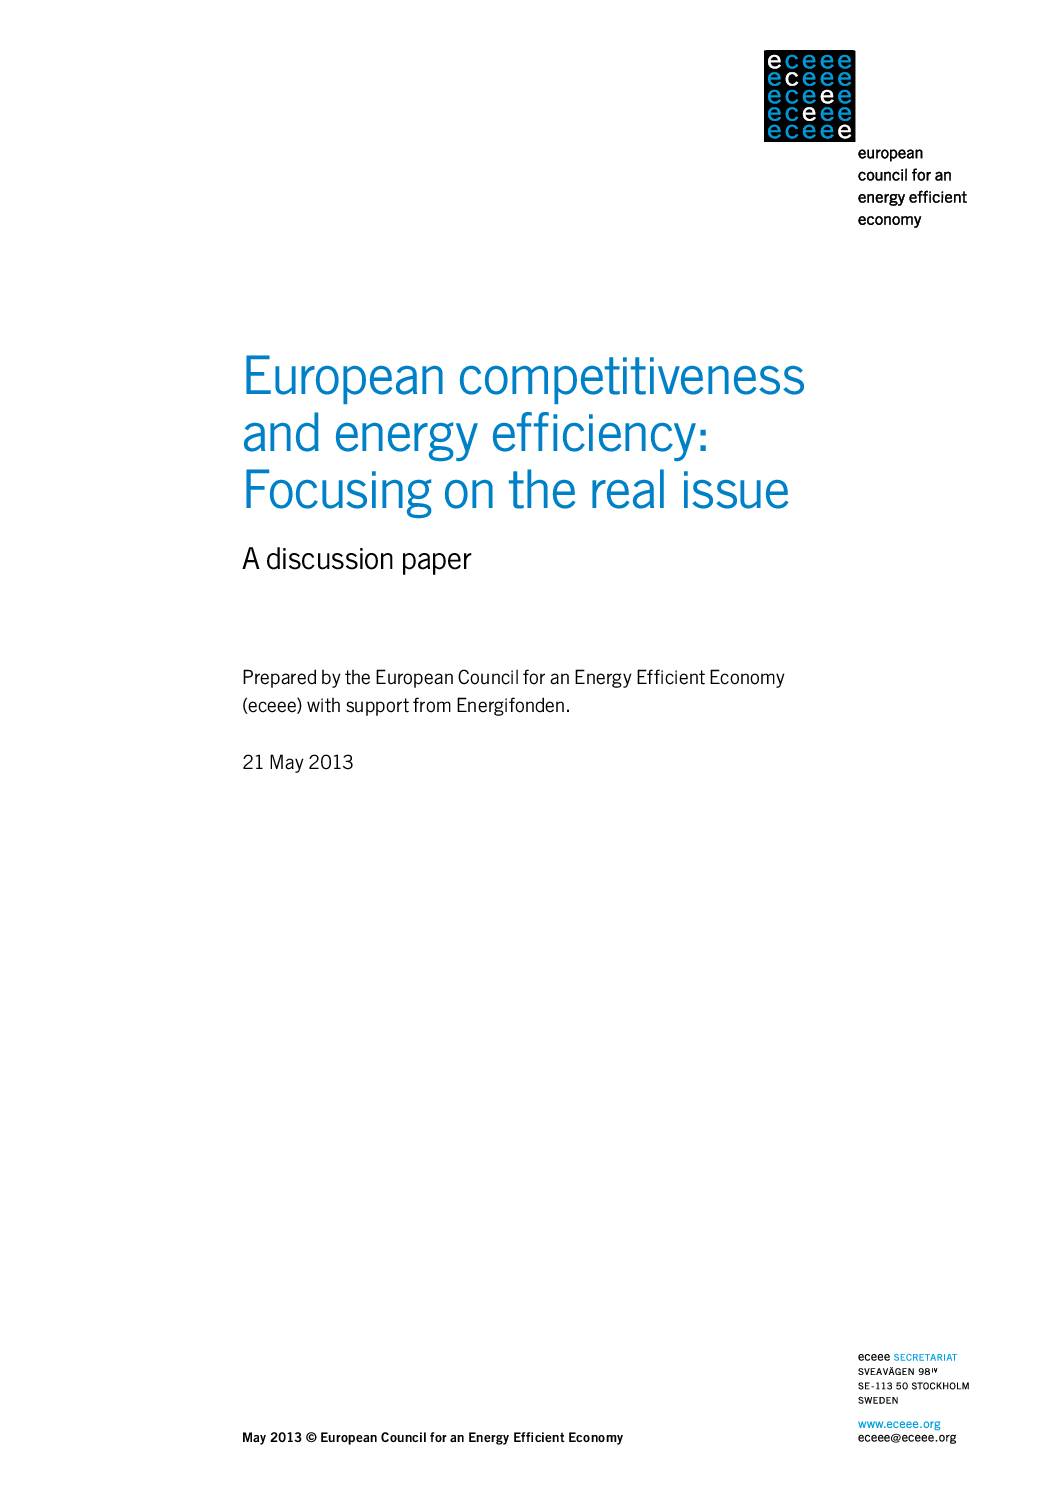 European competitiveness and energy efficiency: Focusing on the real issue